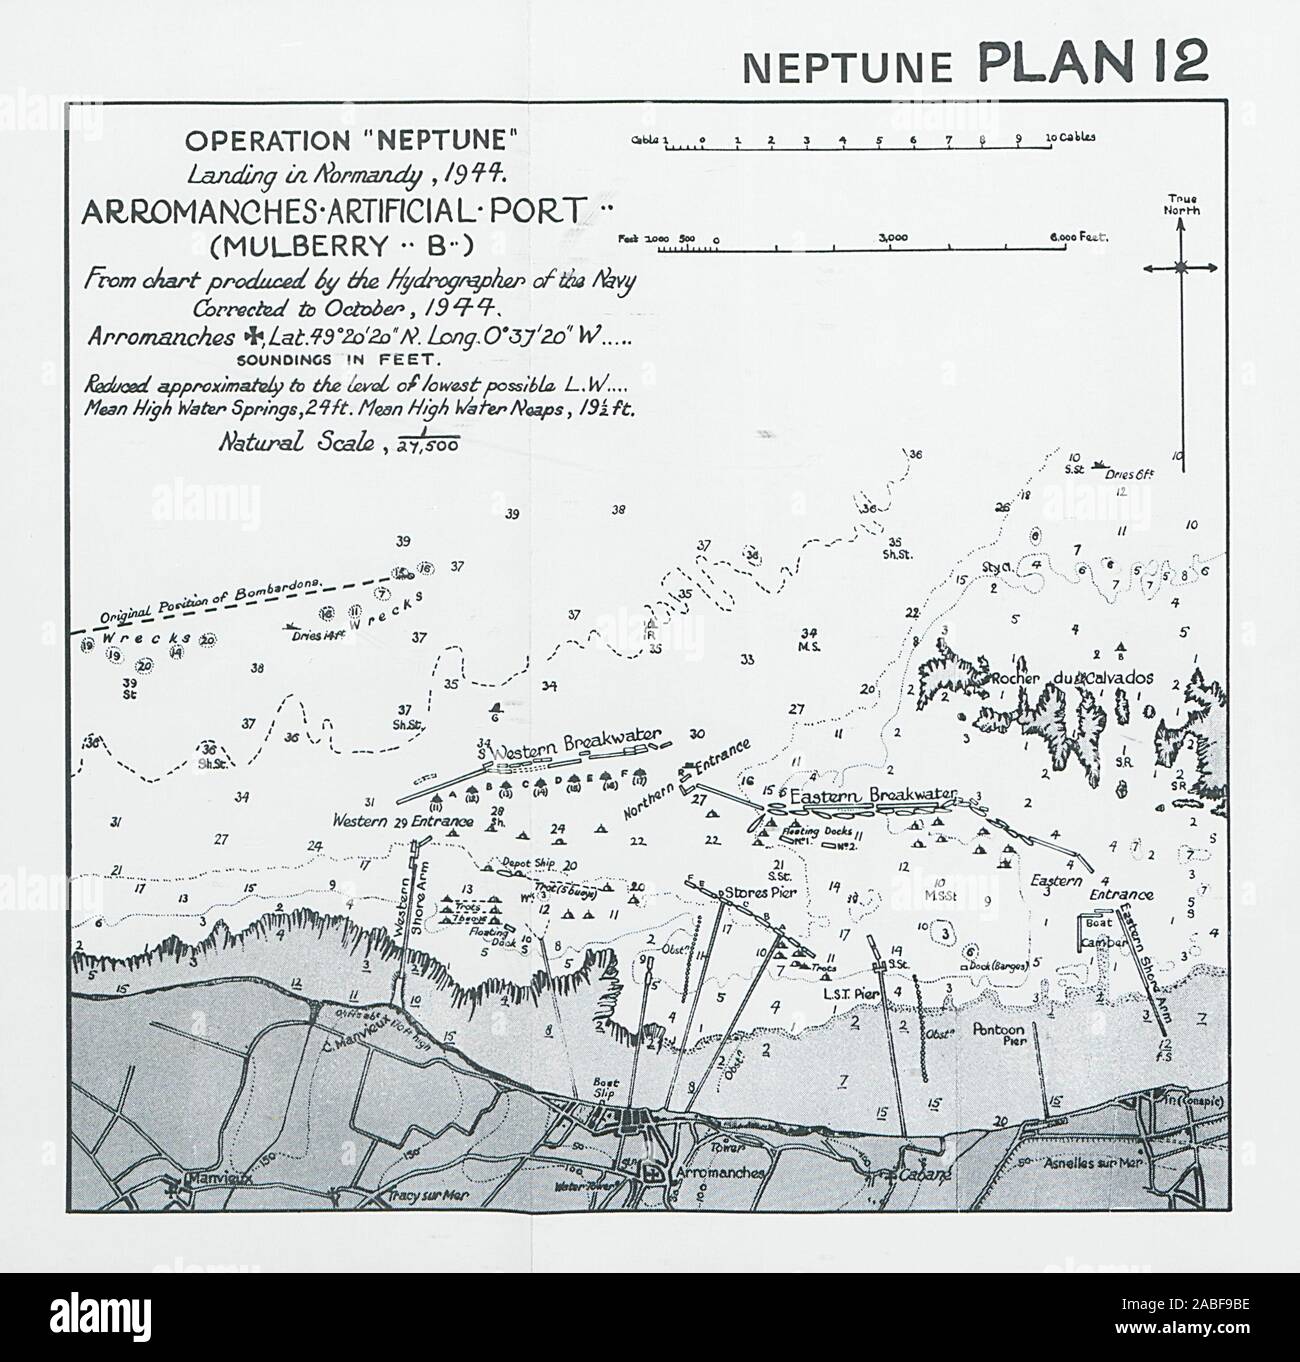 Normandy Landings. D-Day 1944. Arromanches Mulberry Harbour B. Neptune 1994 map Stock Photo